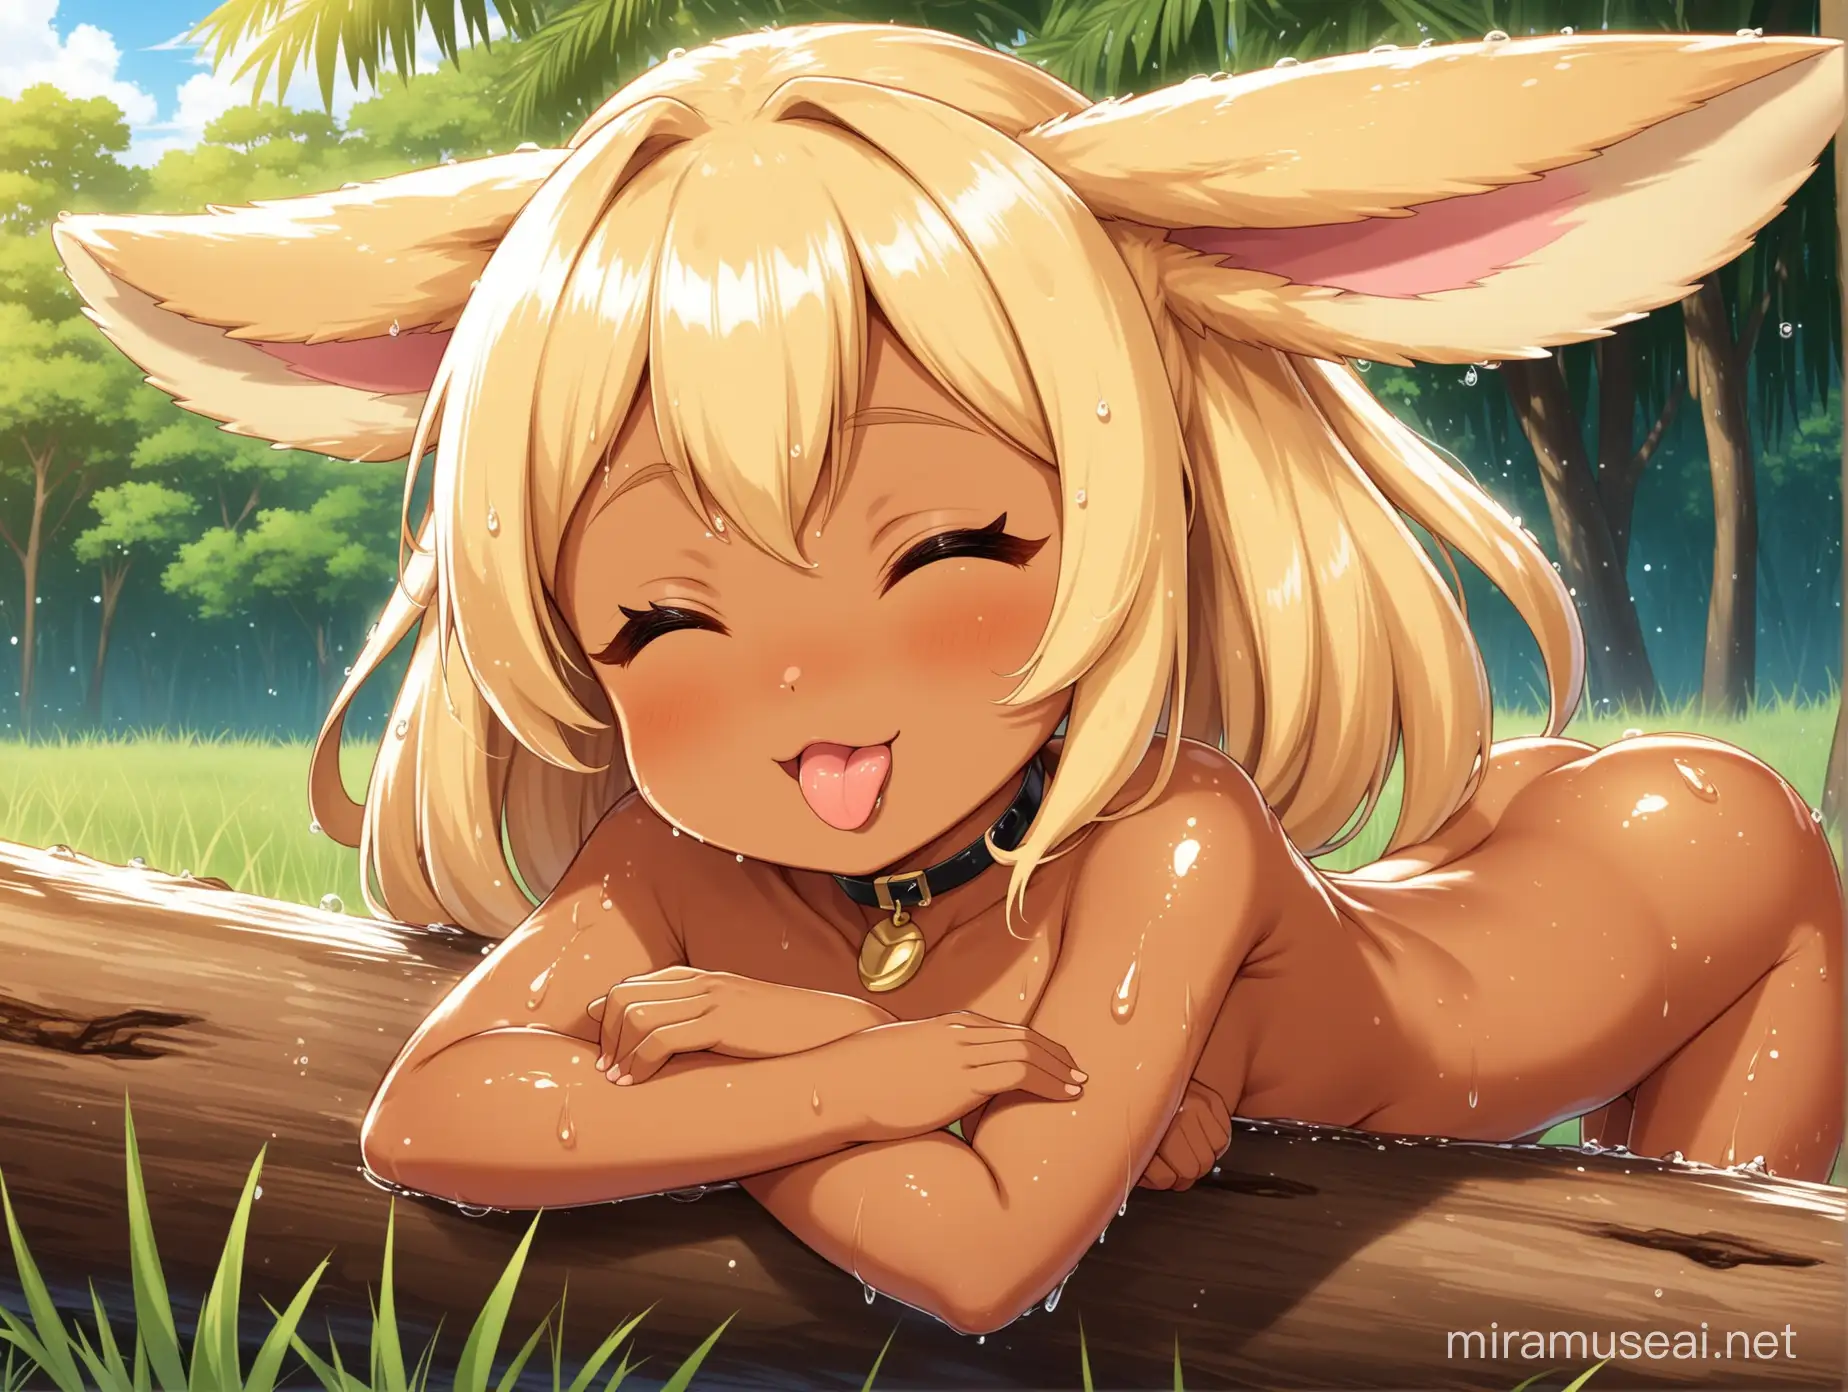 detailed anime style, baby lopunny girl, naked, eyes closed, blushing, dark skin, tanned, wearing choker, wet body, tongue sticking out, happy, in savanna, lying on log,